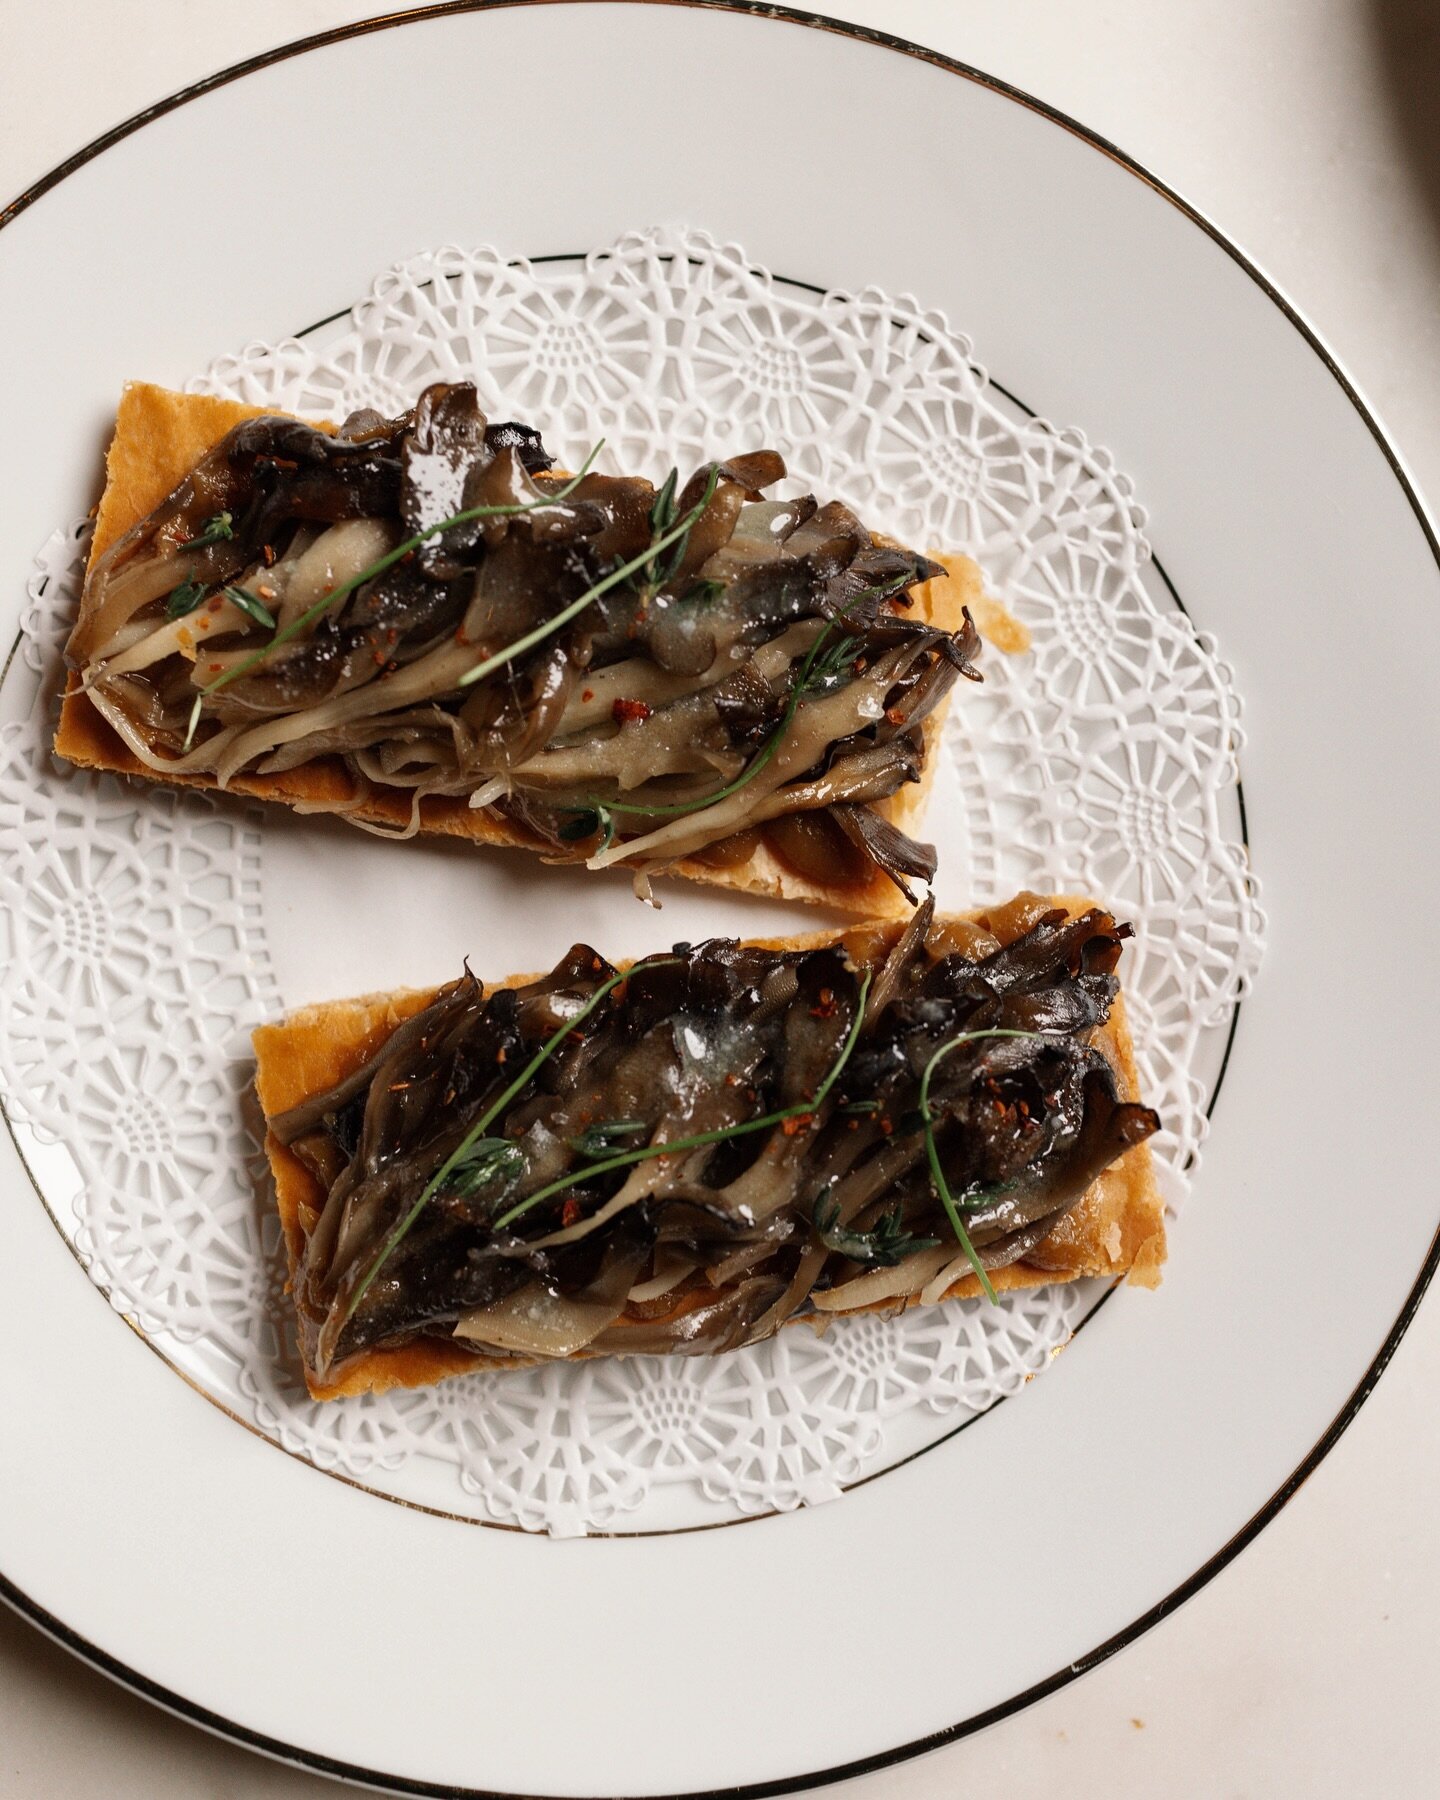 Maitake mushrooms confited, glazed and lightly grilled, and placed over smokey caramelized onions on a puff pastry tart.